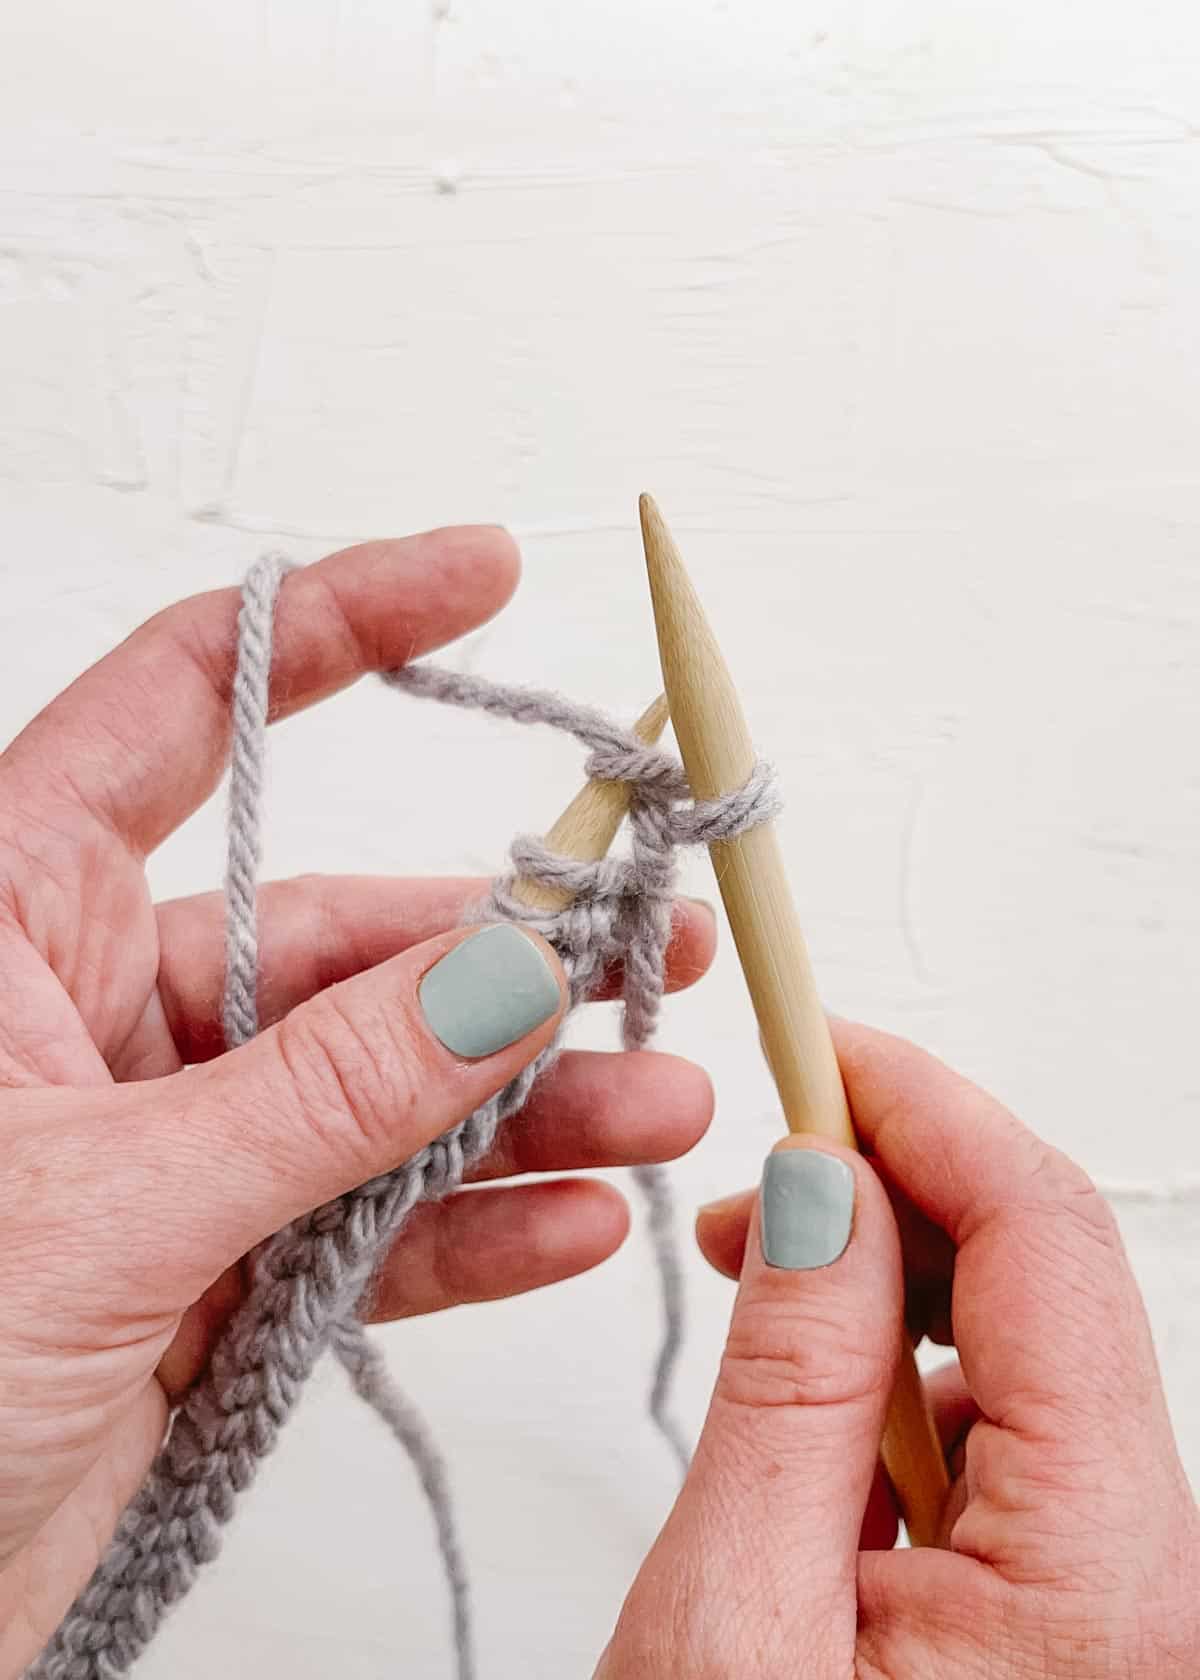 A wooden knitting needle lifting first knit stitch off opposite needle.